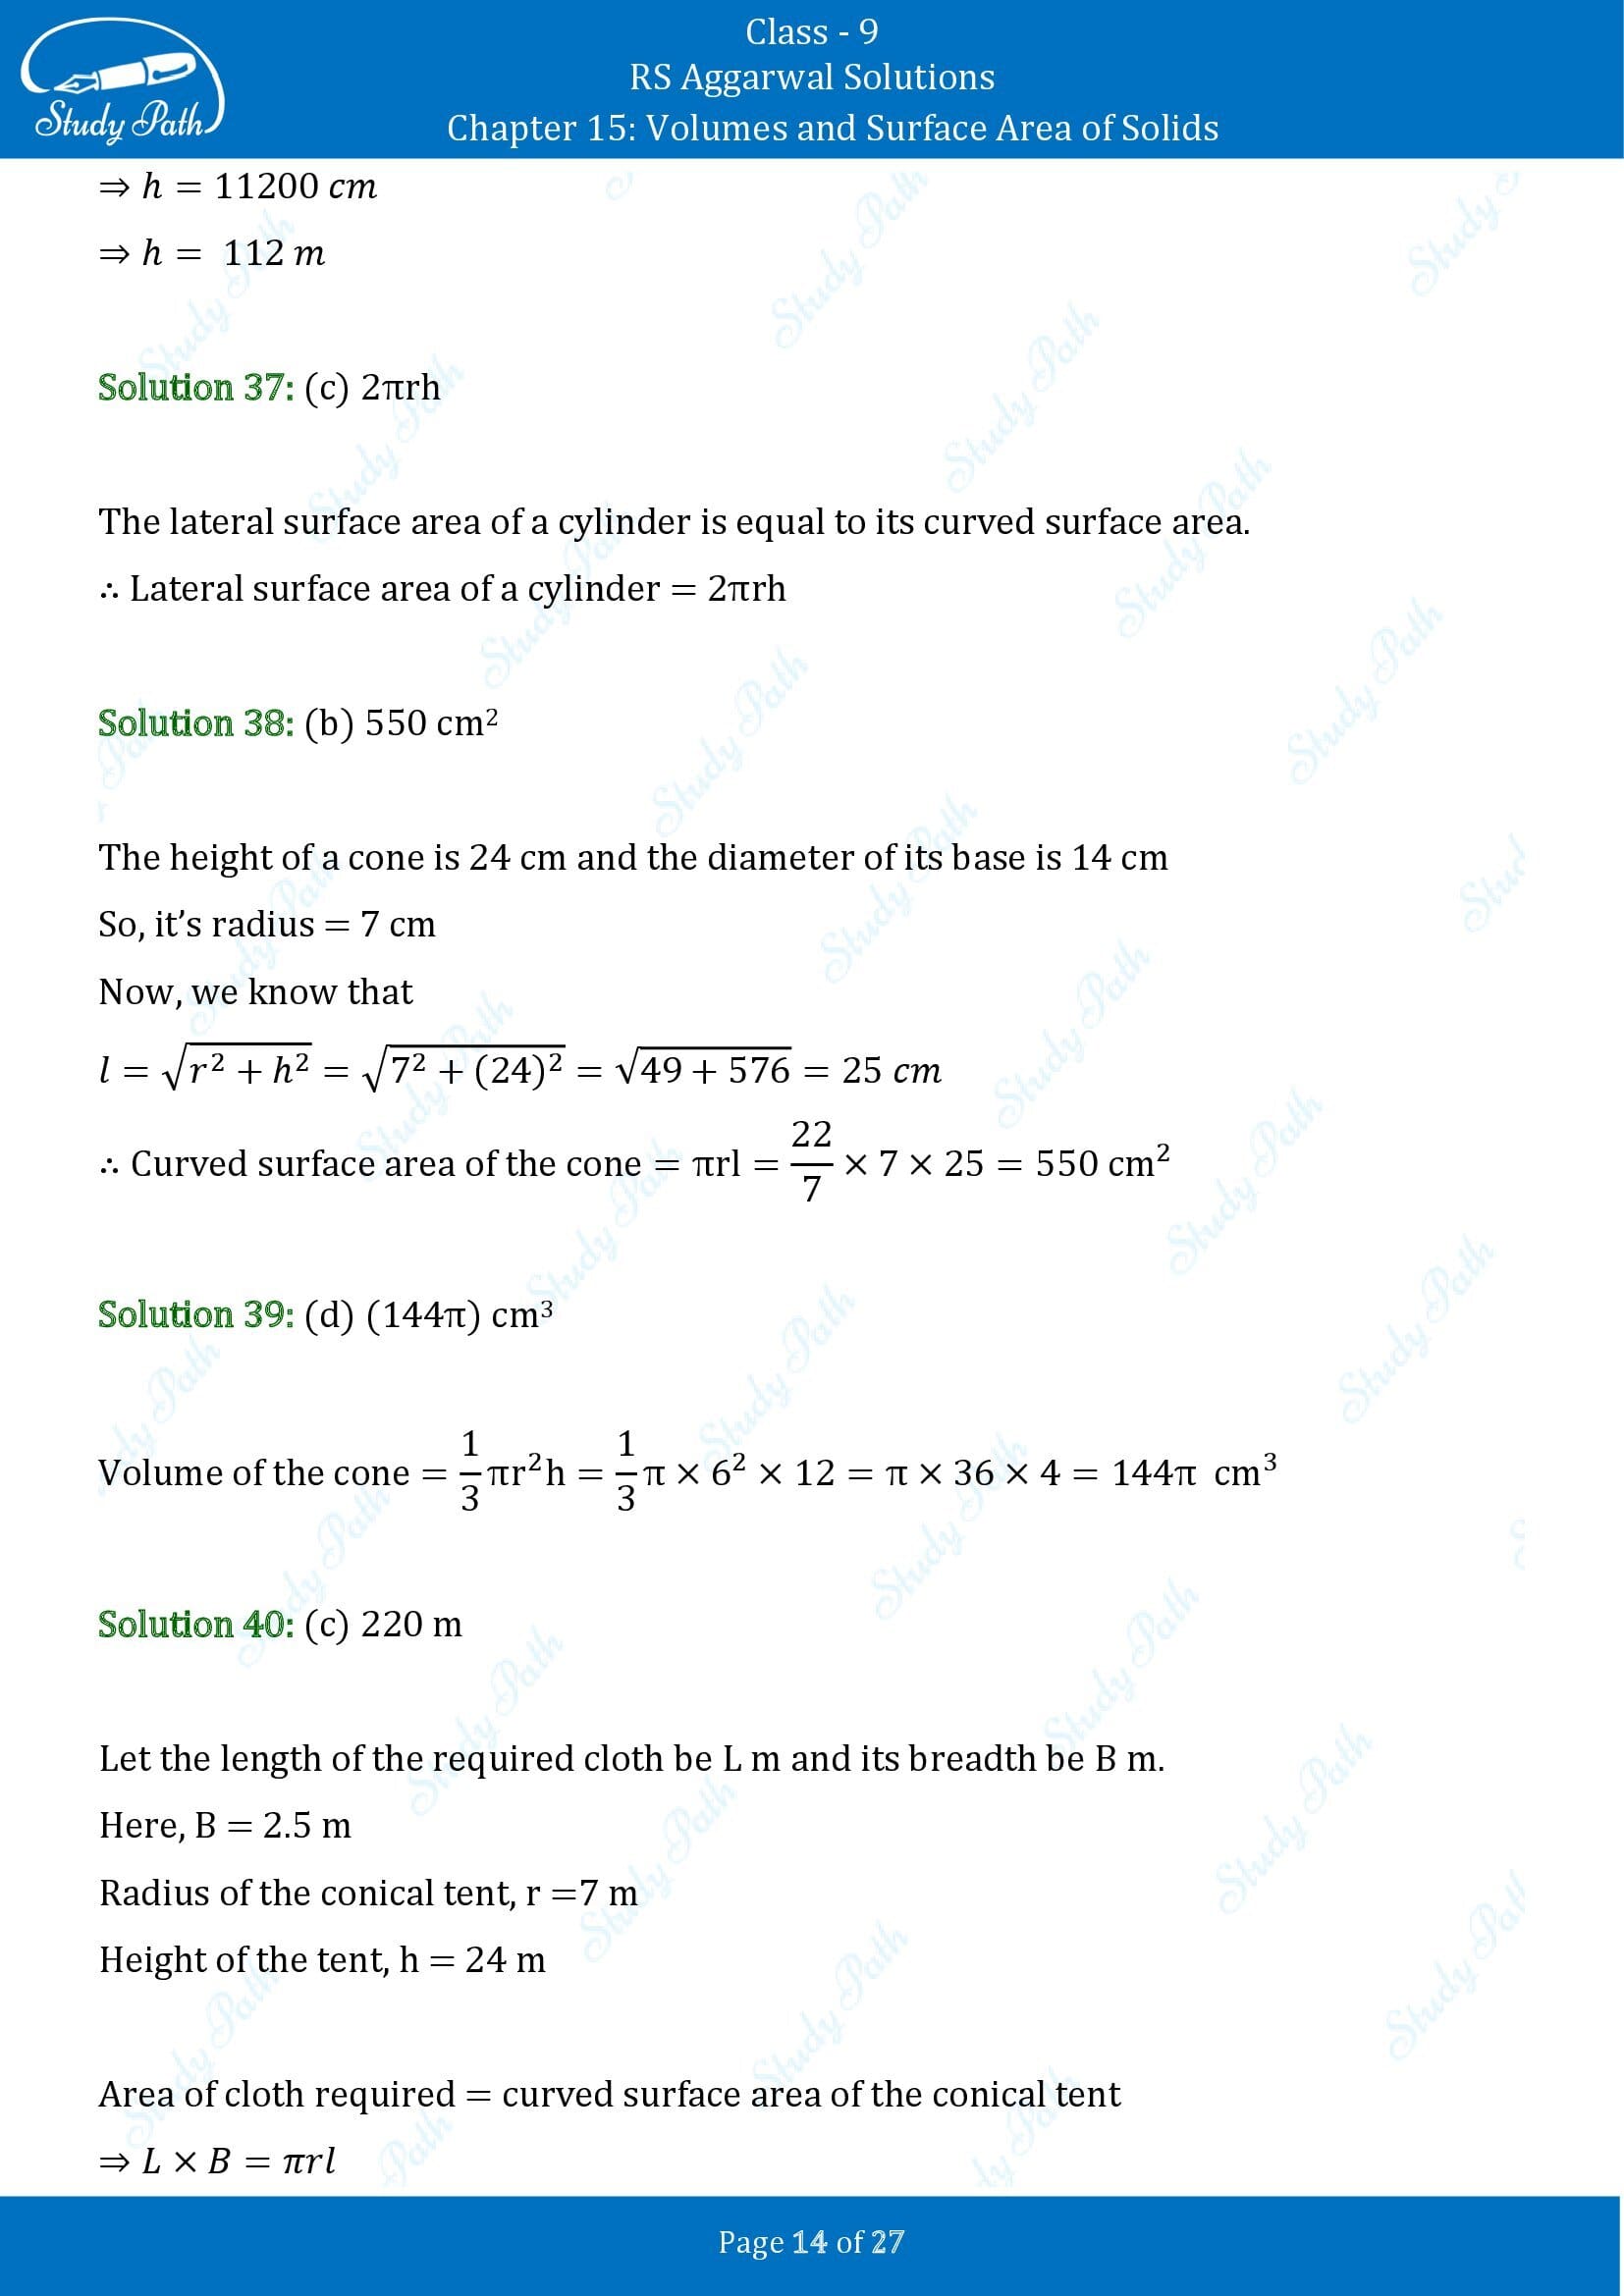 RS Aggarwal Solutions Class 9 Chapter 15 Volumes and Surface Area of Solids Multiple Choice Questions MCQs 00014